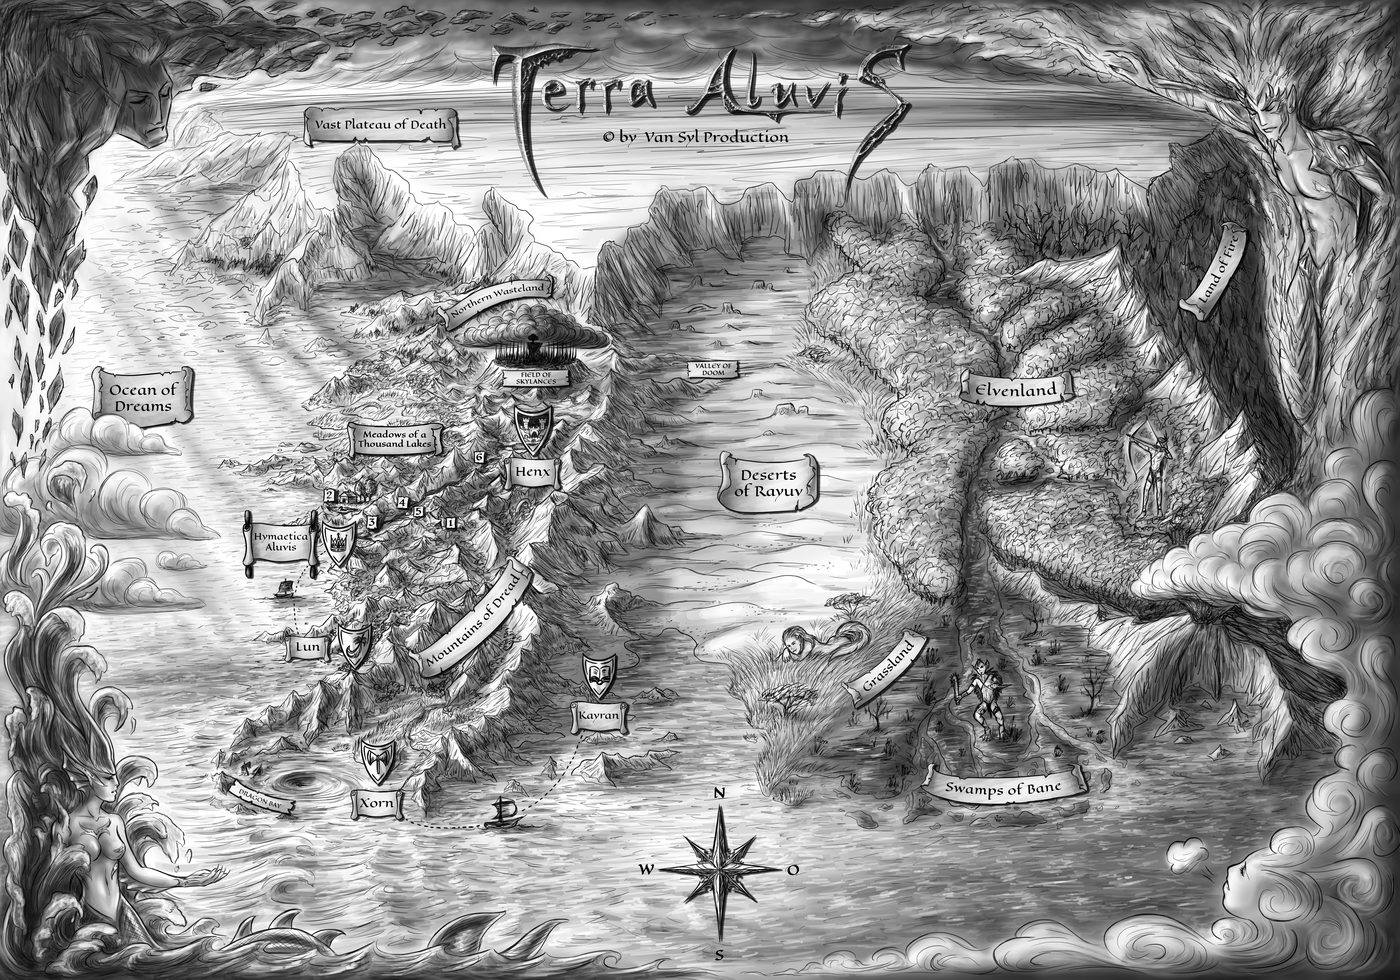 Terra Aluvis - Old Illustrated Map (english)